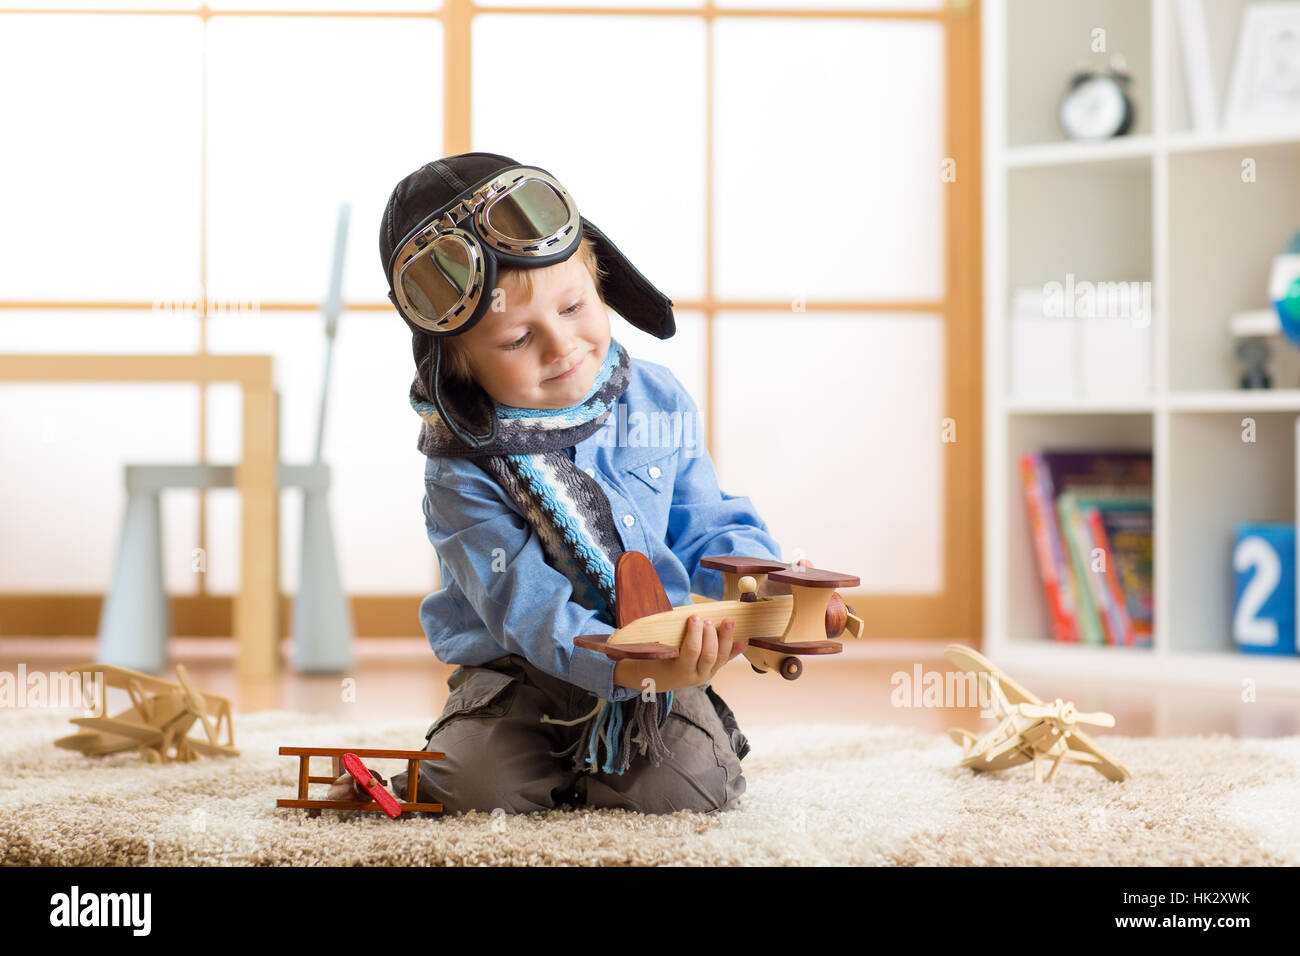 Little kid boy dreams be an aviator and plays with toy airplanes sitting on floor in nursery room Stock Photo